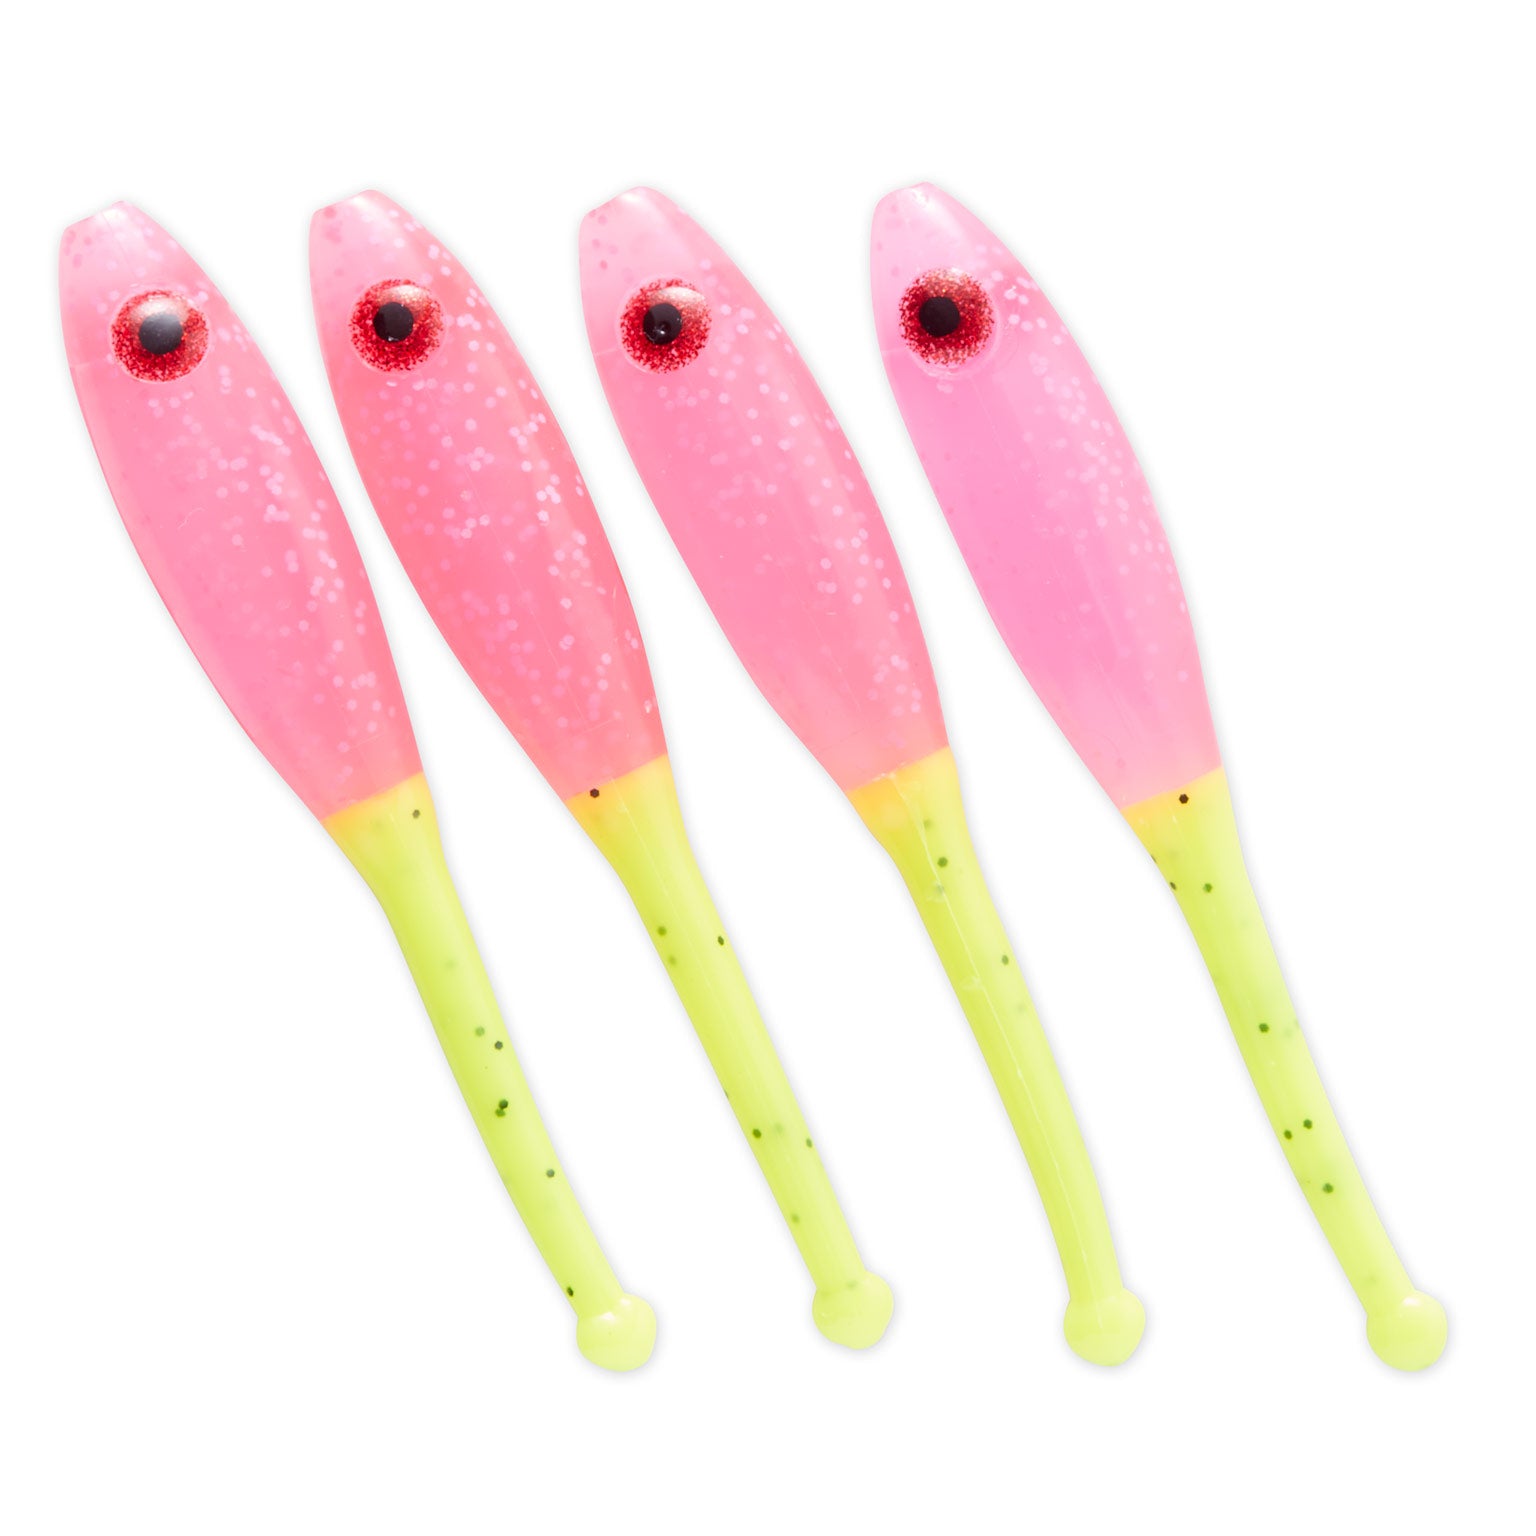 The Slick Lures Pink Dirty Chartreuse